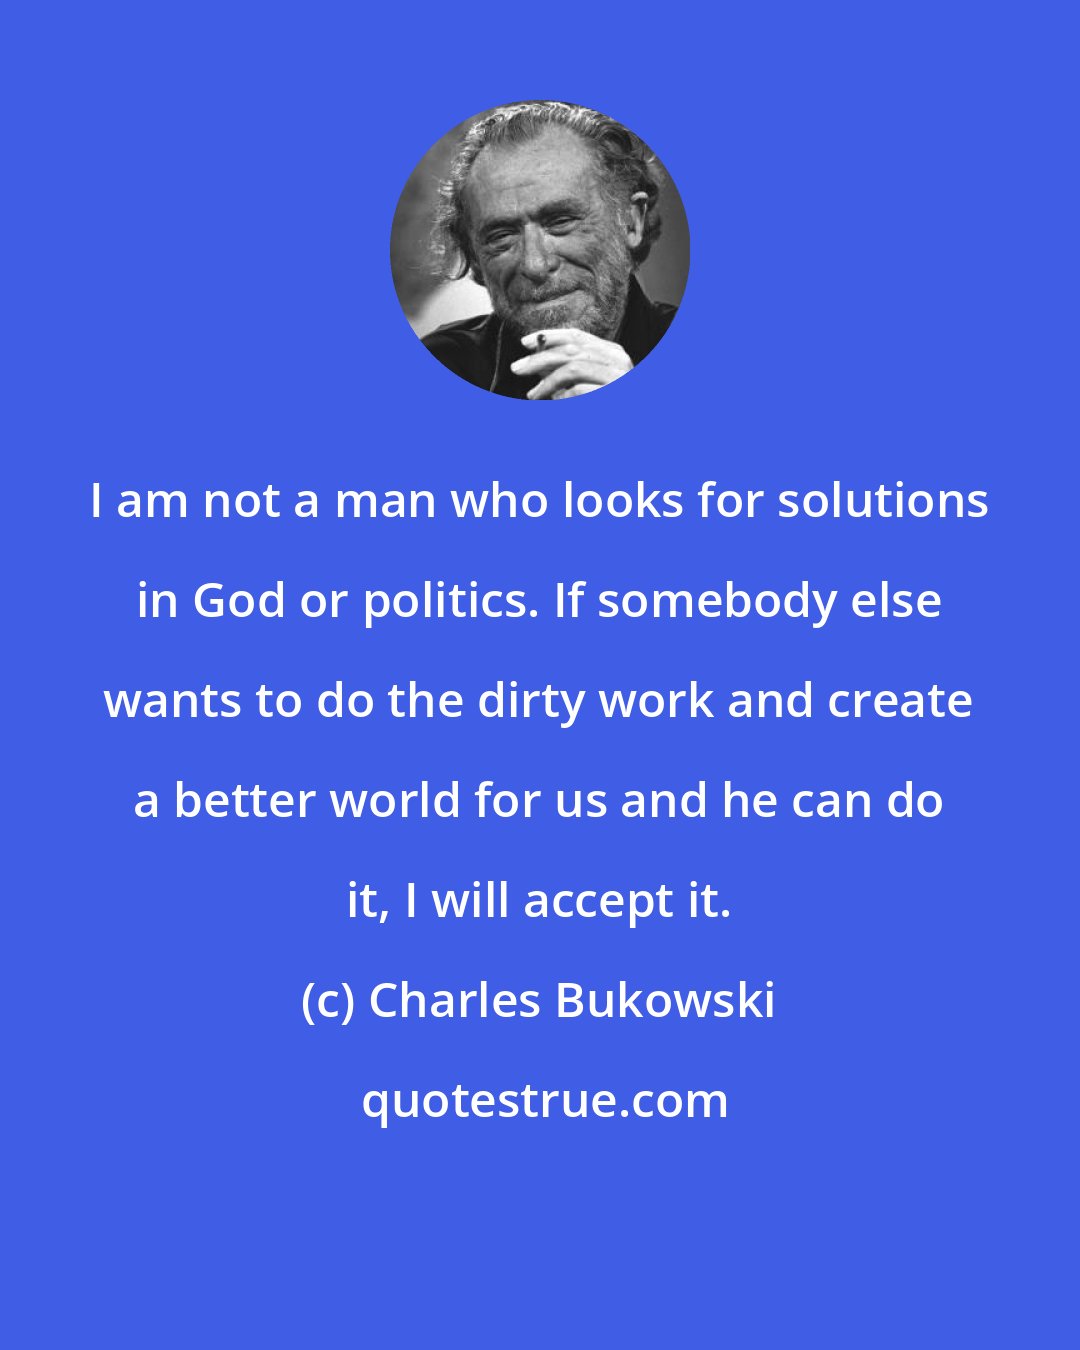 Charles Bukowski: I am not a man who looks for solutions in God or politics. If somebody else wants to do the dirty work and create a better world for us and he can do it, I will accept it.